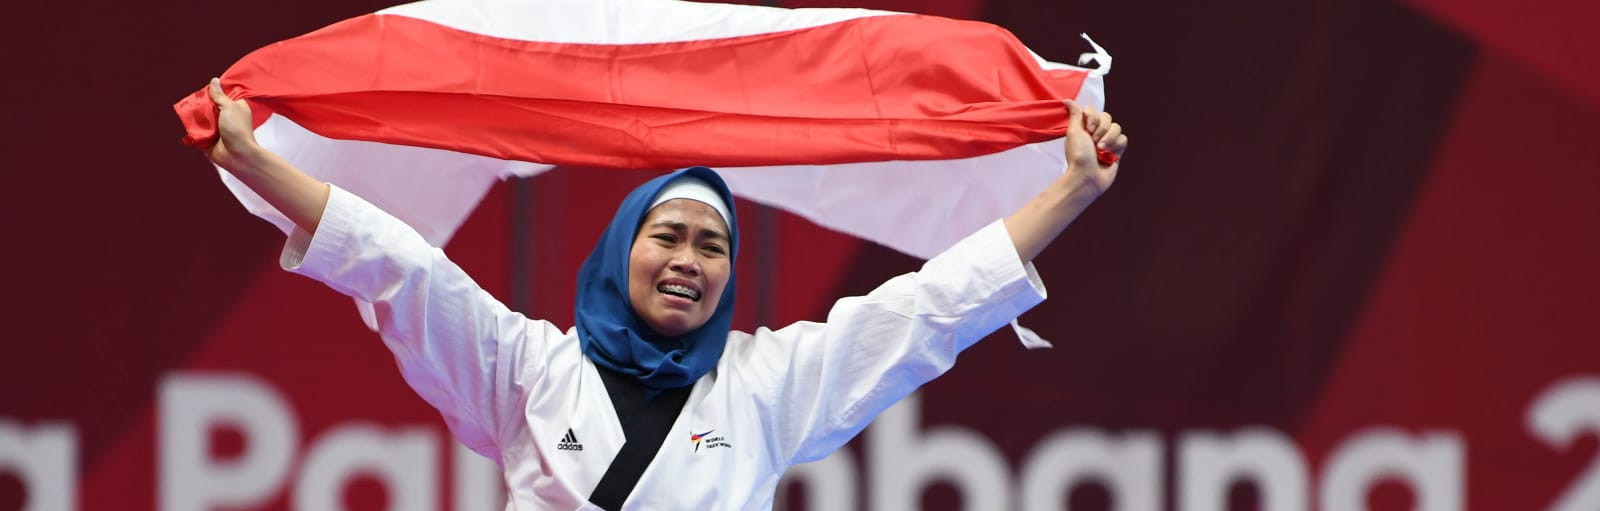 Taekwondo player Defia Rosmaniar secured Indonesia's first gold medal of the 2018 Asian Games in Jakarta ©Asian Games 2018